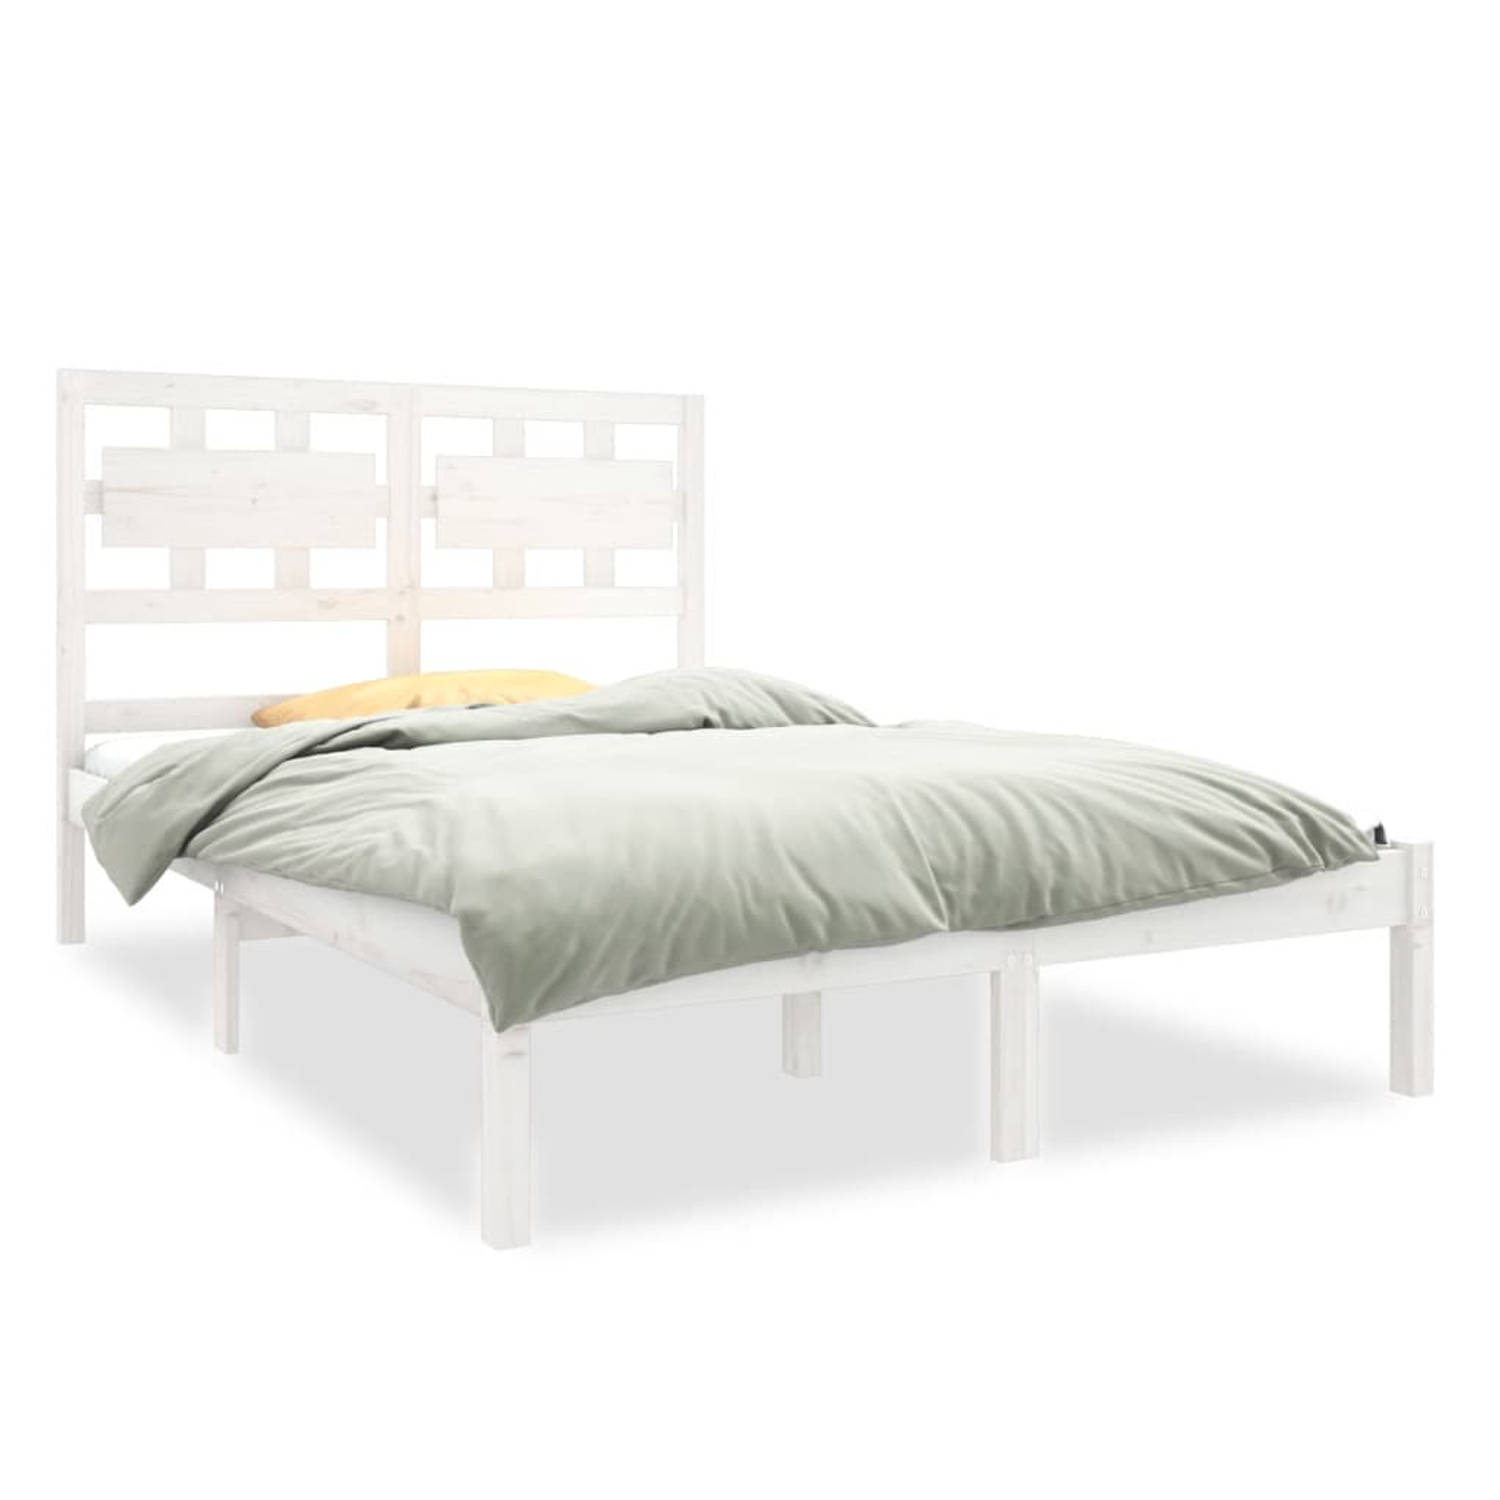 The Living Store Bedframe massief hout wit 140x190 cm - Bedframe - Bedframes - Tweepersoonsbed - Bed - Bedombouw - Dubbel Bed - Frame - Bed Frame - Ledikant - Bedframe Met Hoofdein